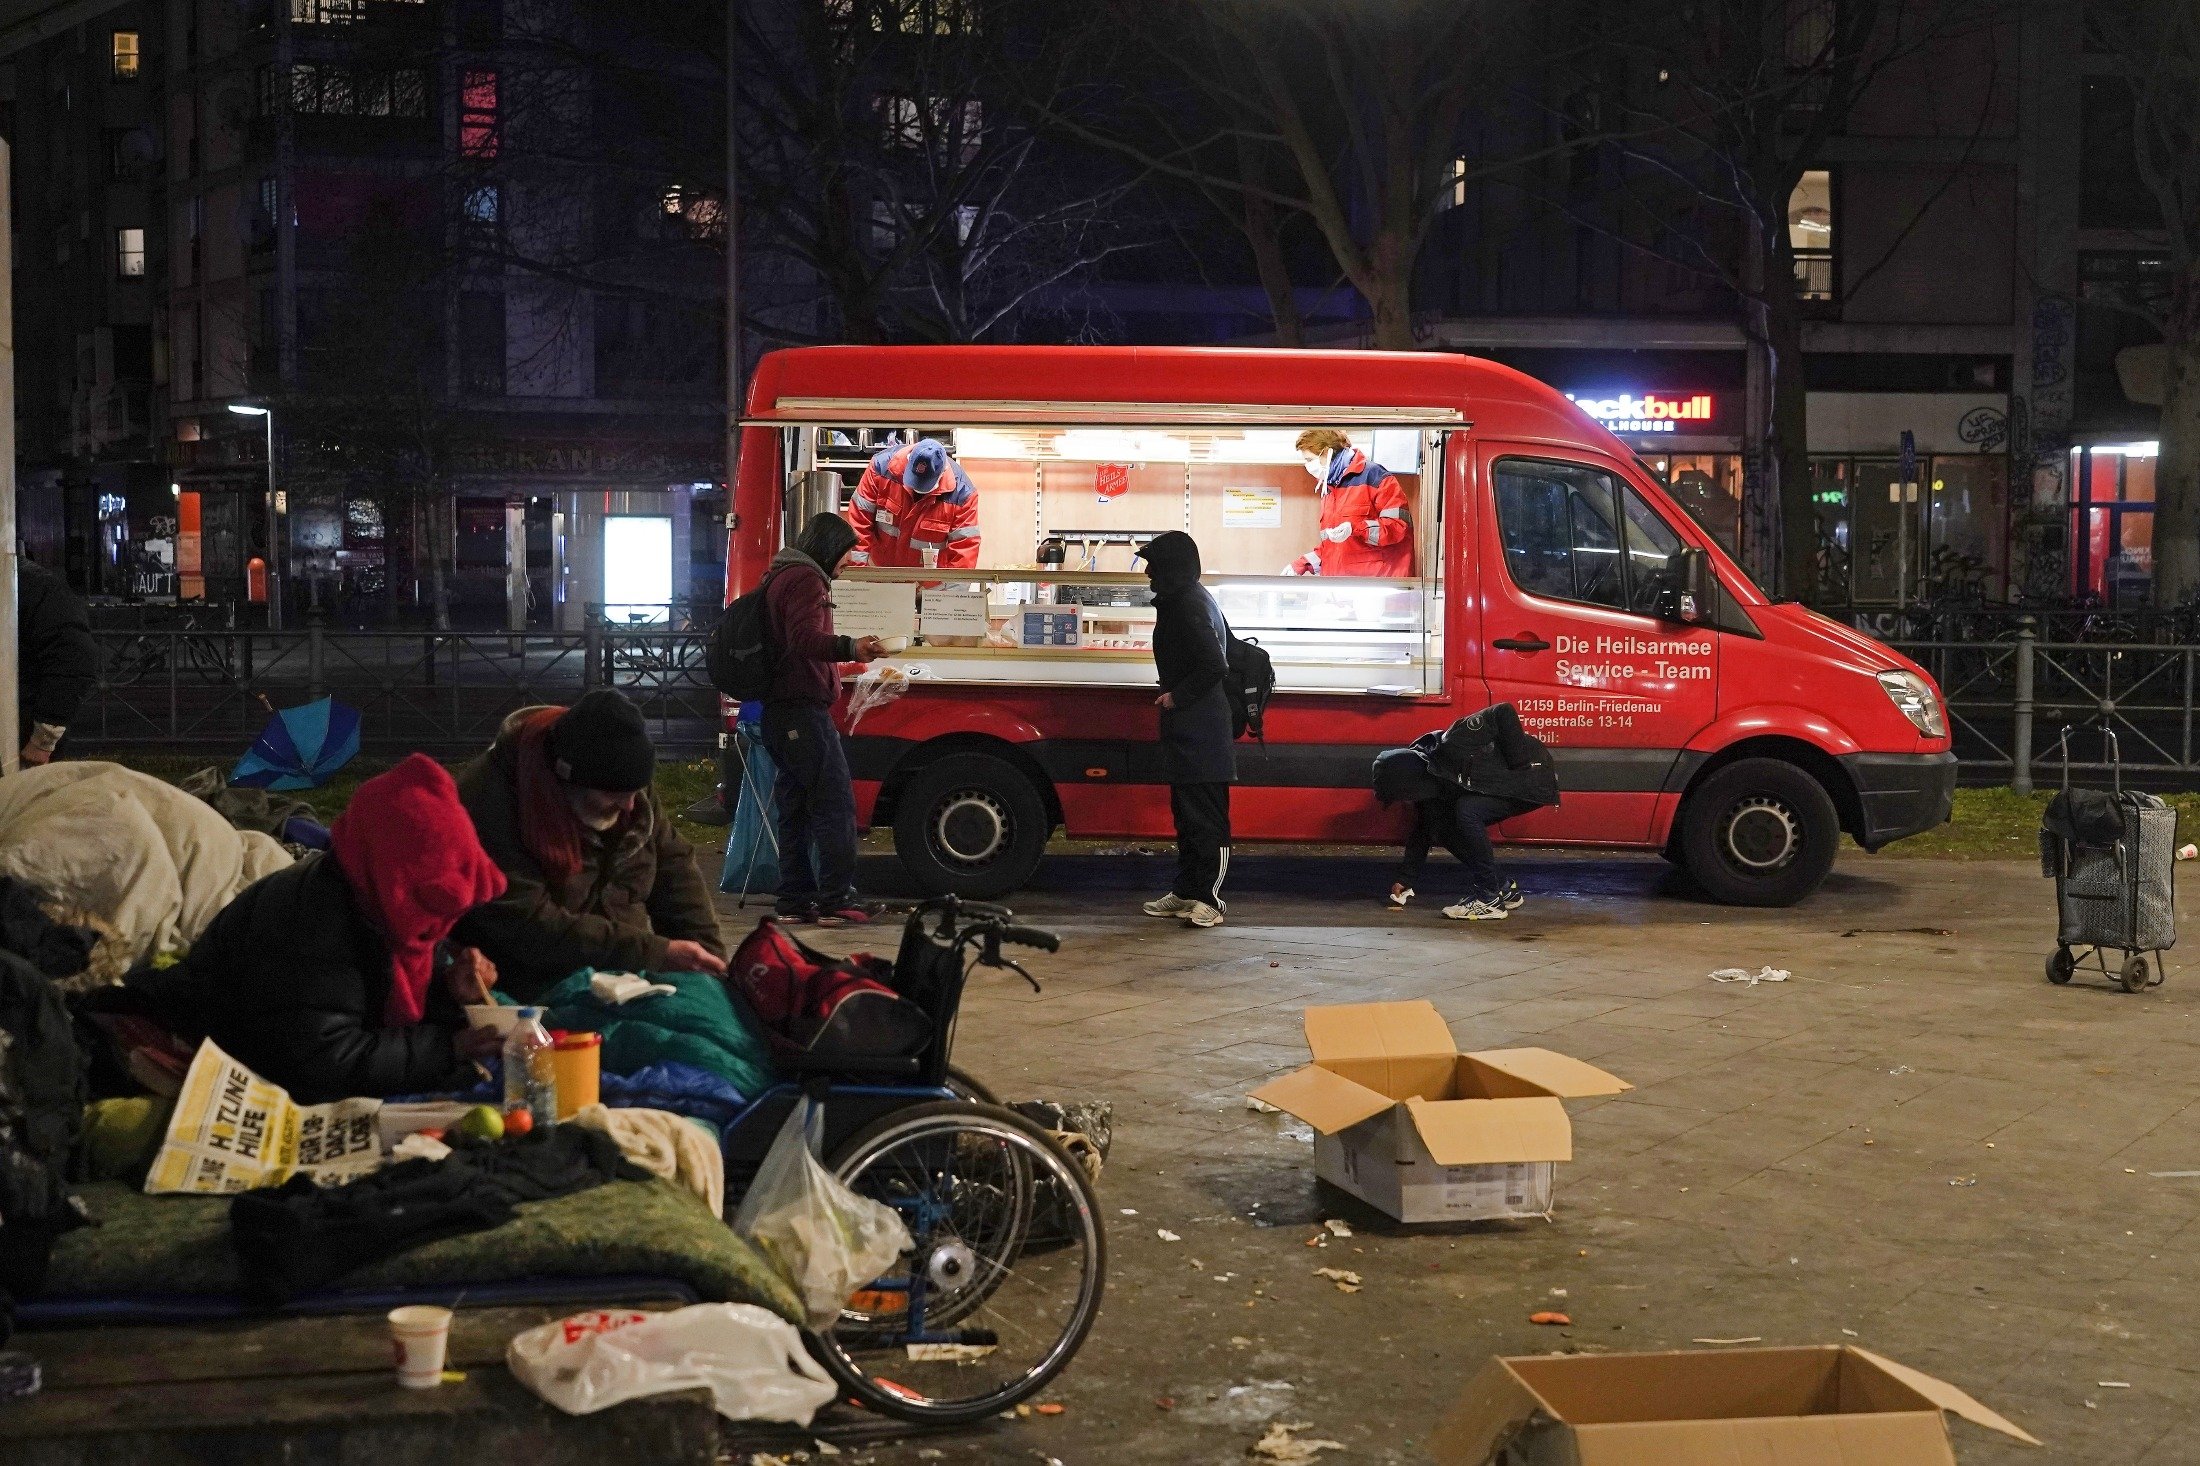 Volunteers of The Salvation Army distribute warm food to homeless people at Kottbuser Tor in the Kreuzberg district of Berlin, Germany, April 2, 2020. (Getty Images)